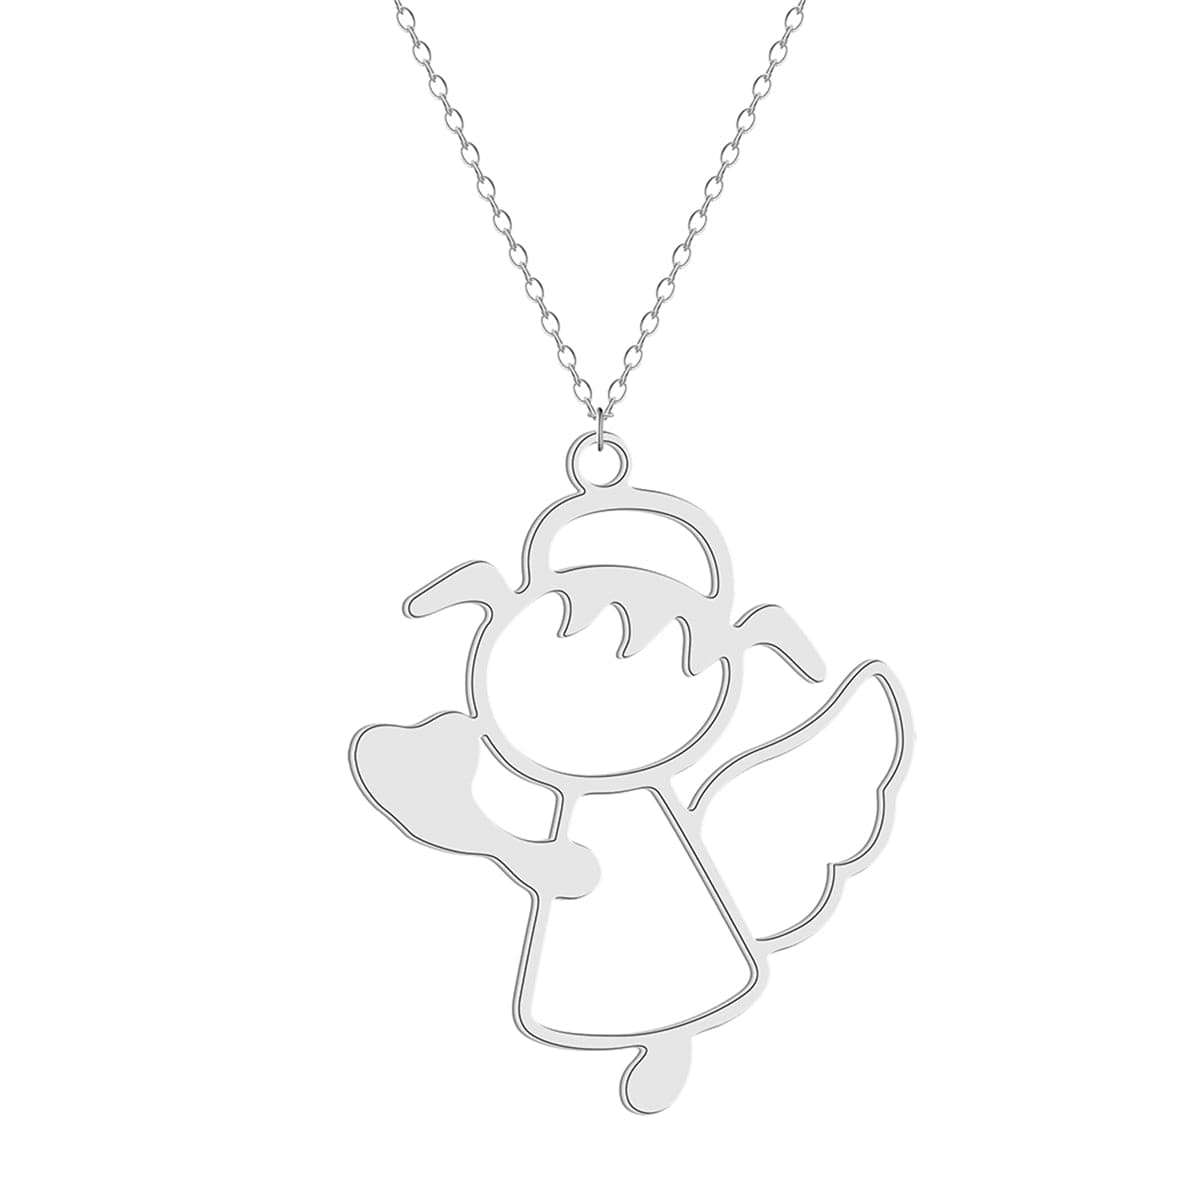 Silver-Plated Openwork Cute Angel Pendant Necklace